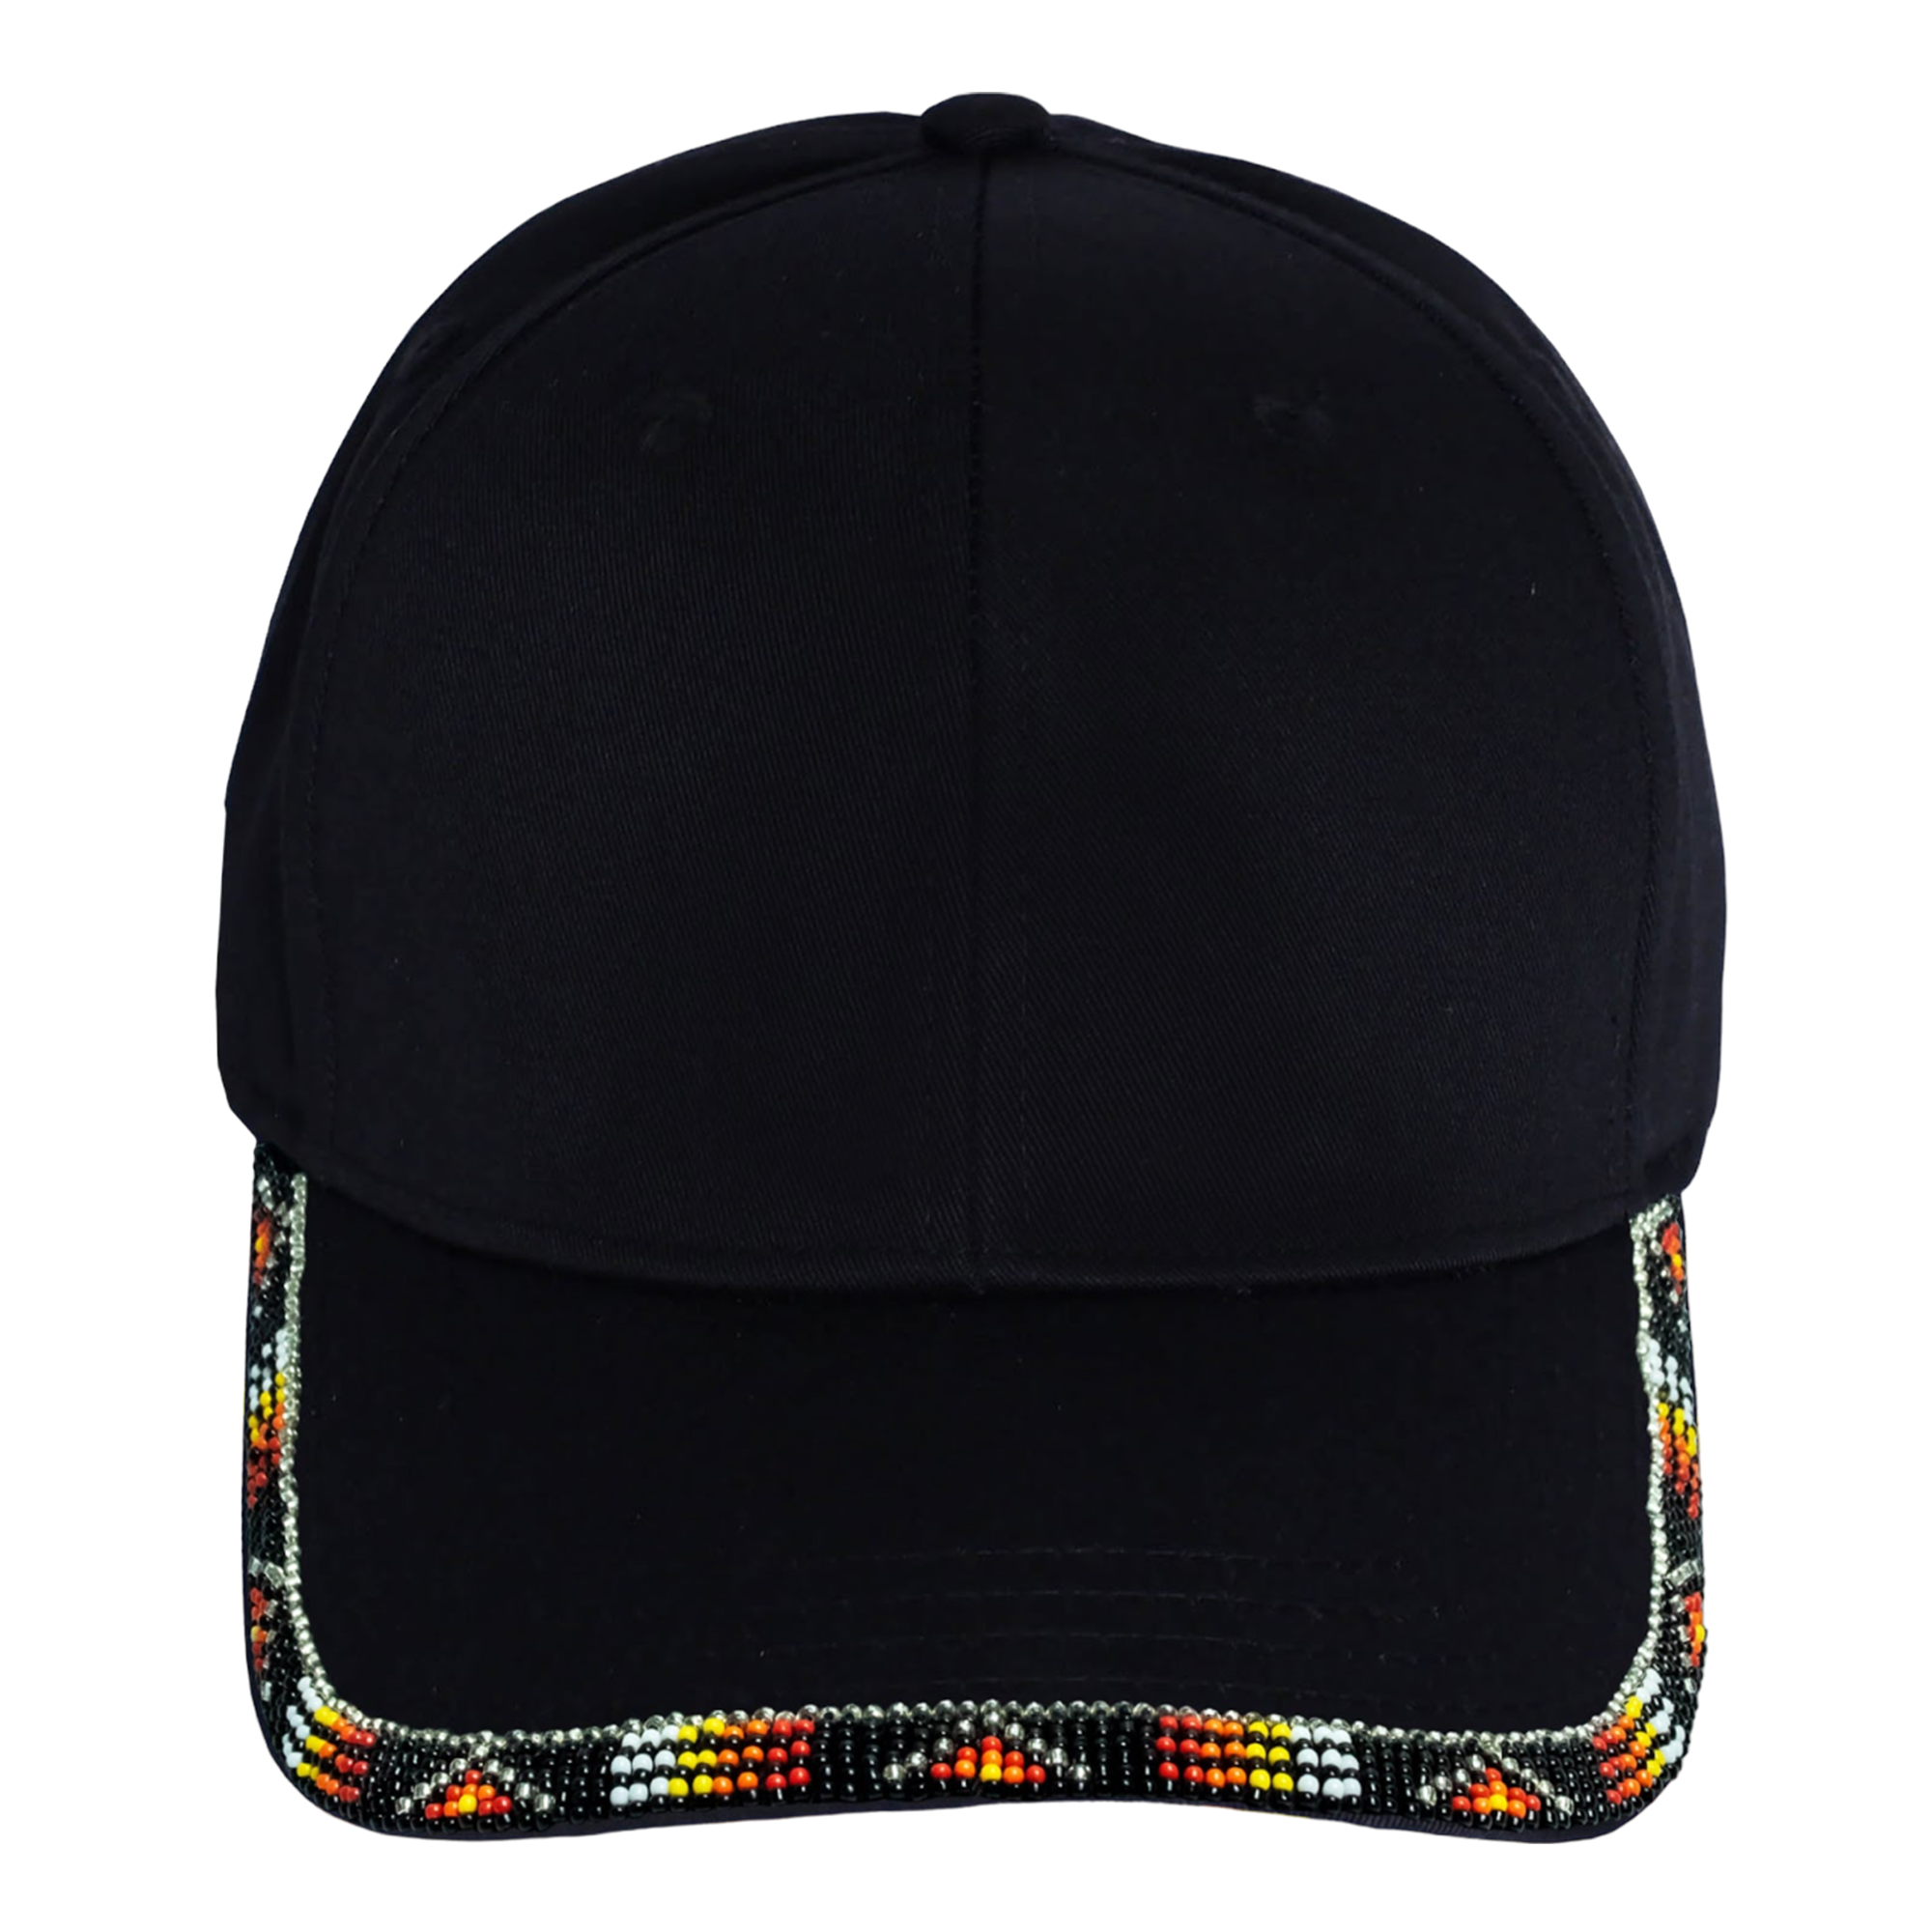 SALE 50% OFF - Baseball Cap With Brim Cotton Unisex Native American Style